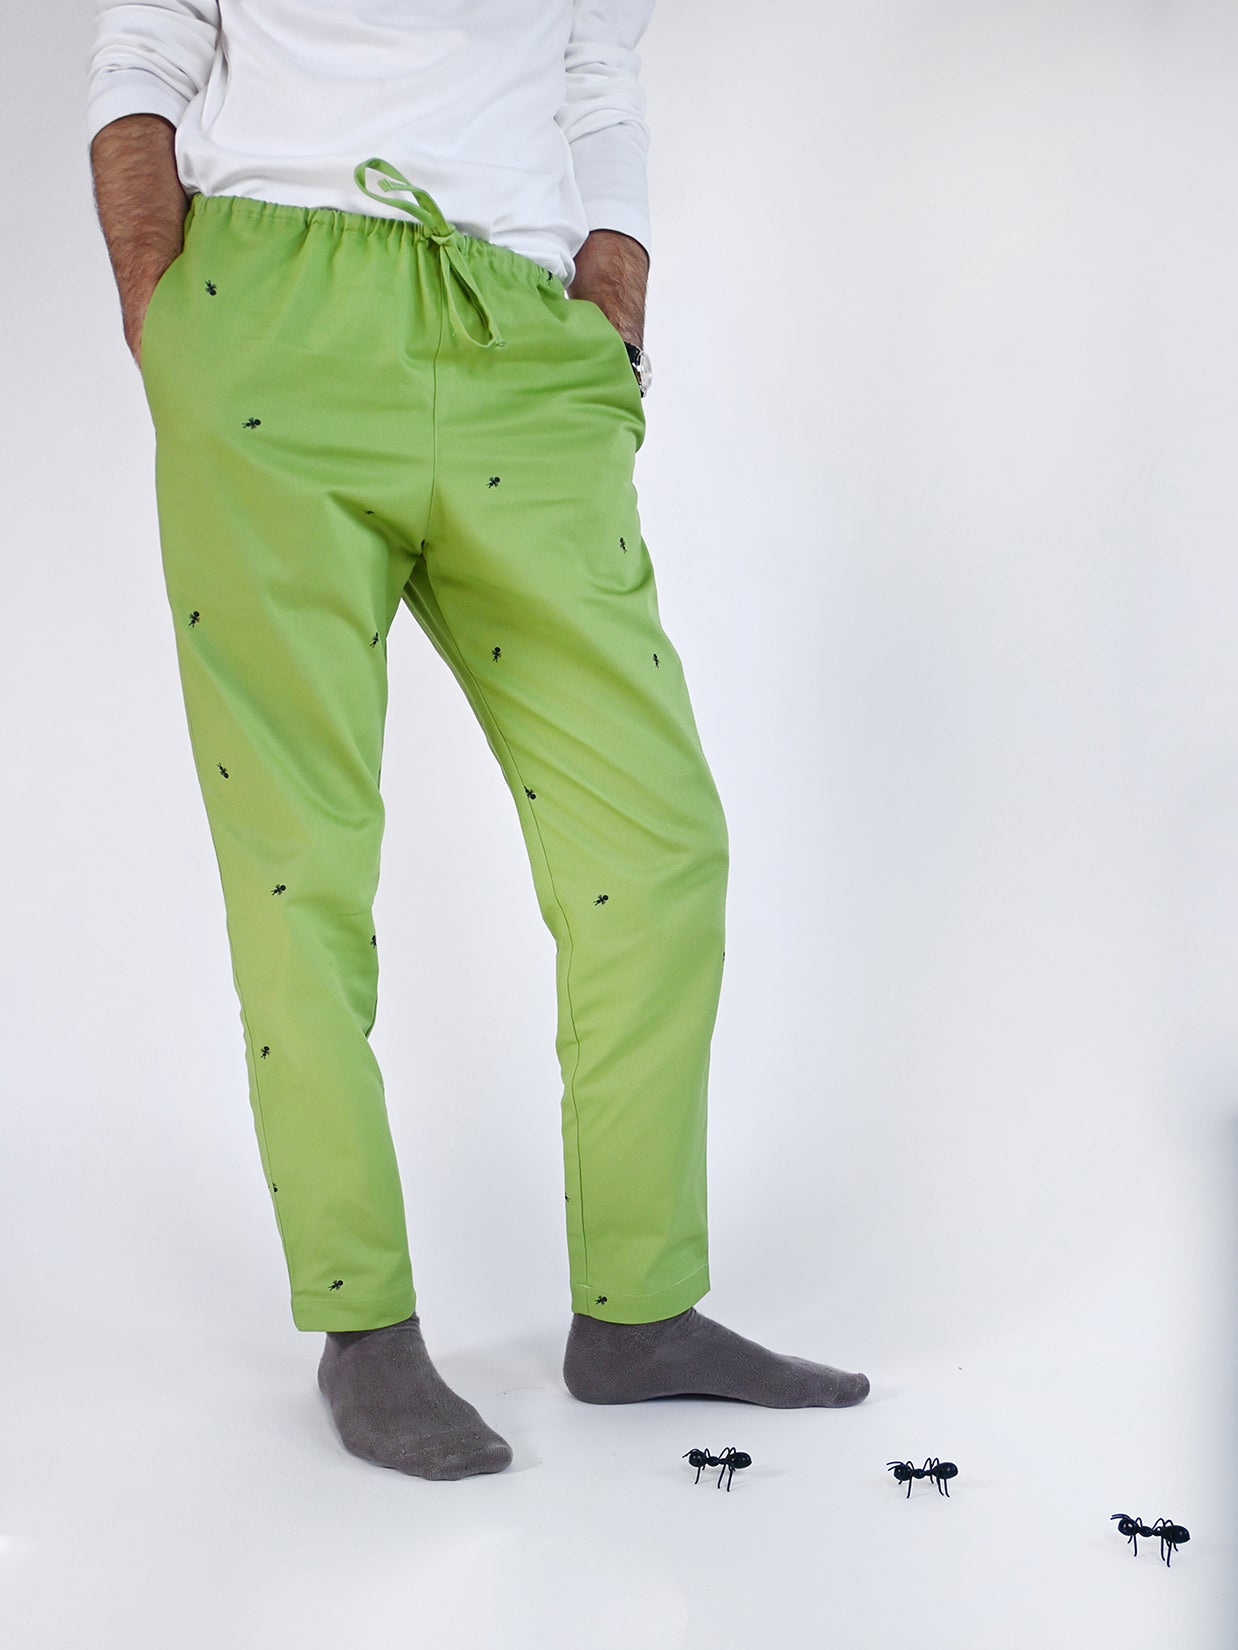 Natali Koromoto x HO HOS HOLE IN THE WALL brands "Ants on Your Pants"  print design lounge pull-on pants in Avocado green dye colorway. 100% organic cotton twill.